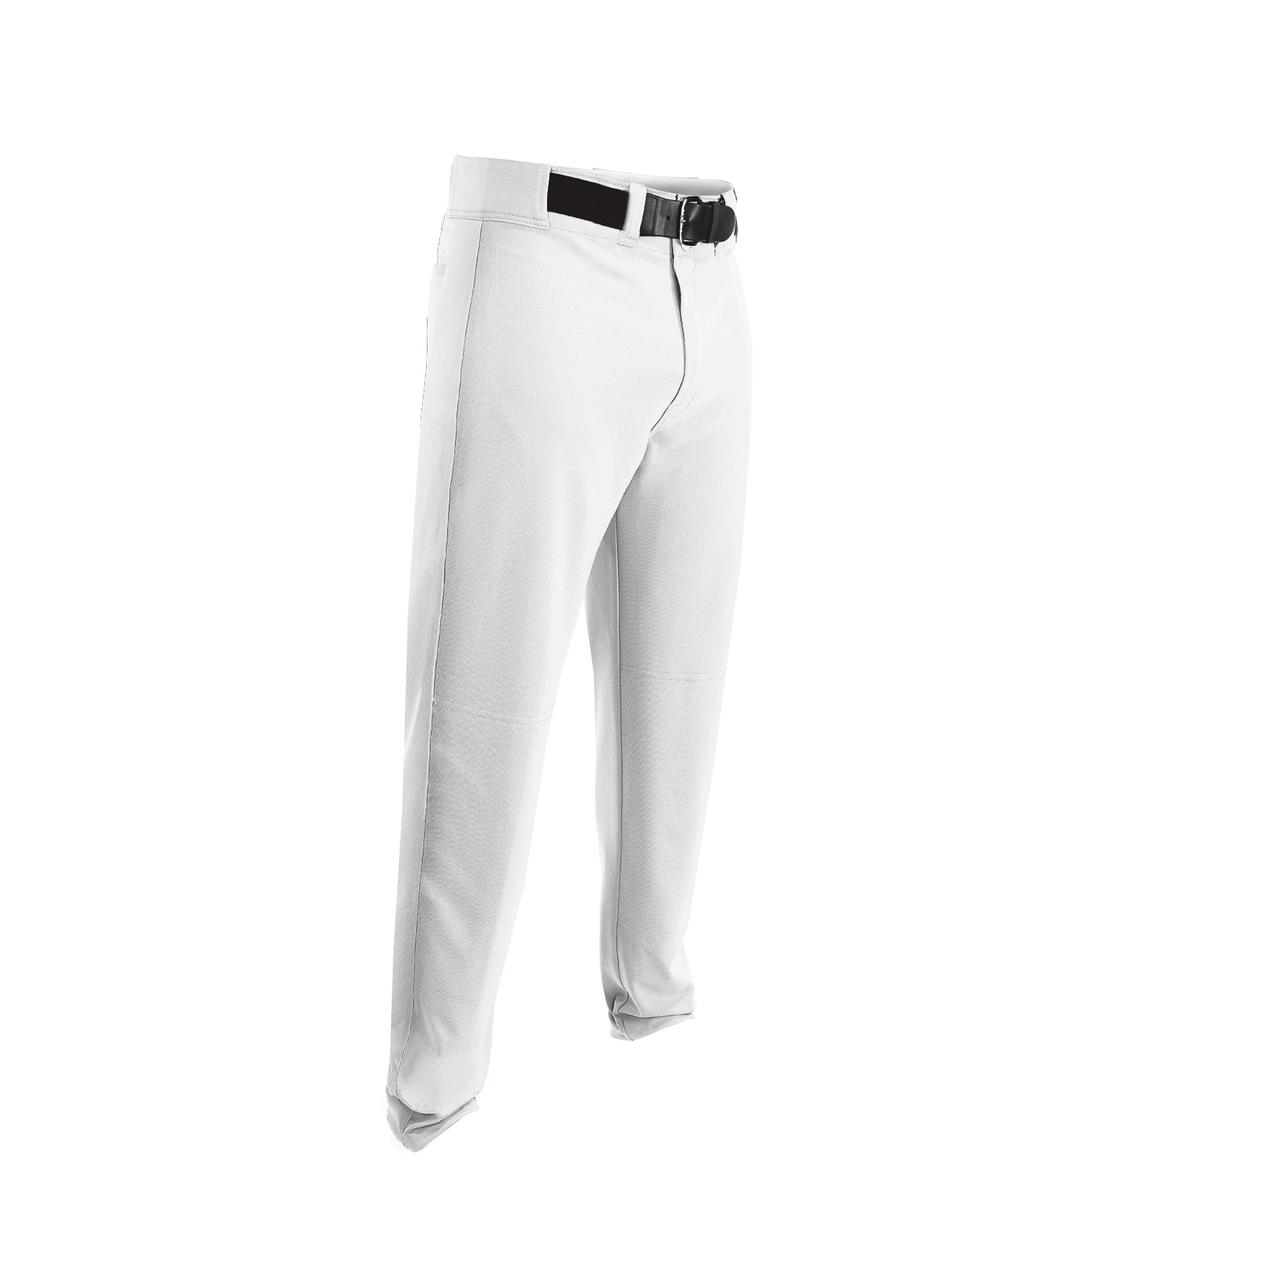 Youth Two Color Baseball Pants, White & Red - Small - Walmart.com